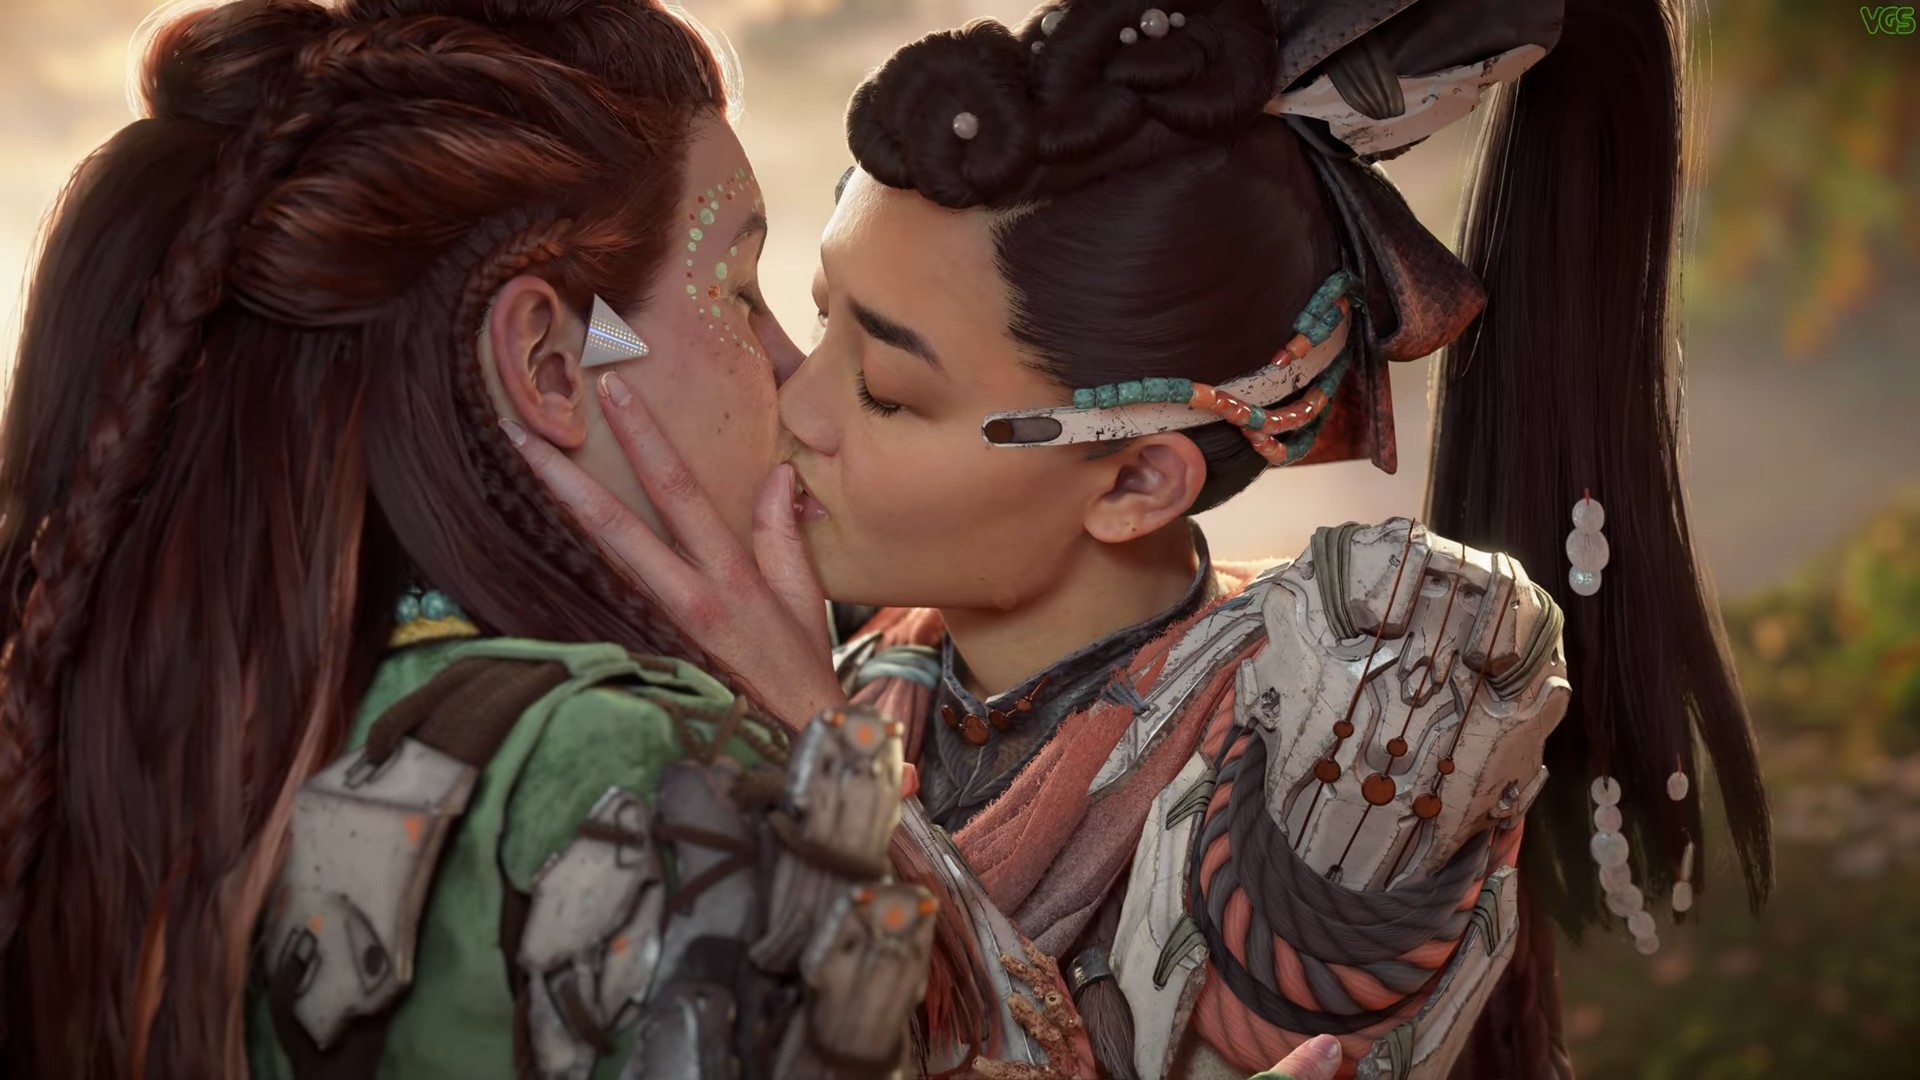 The Horizon Burning Shores DLC is receiving an overwhelming number of negative reviews about Lesbian Kiss